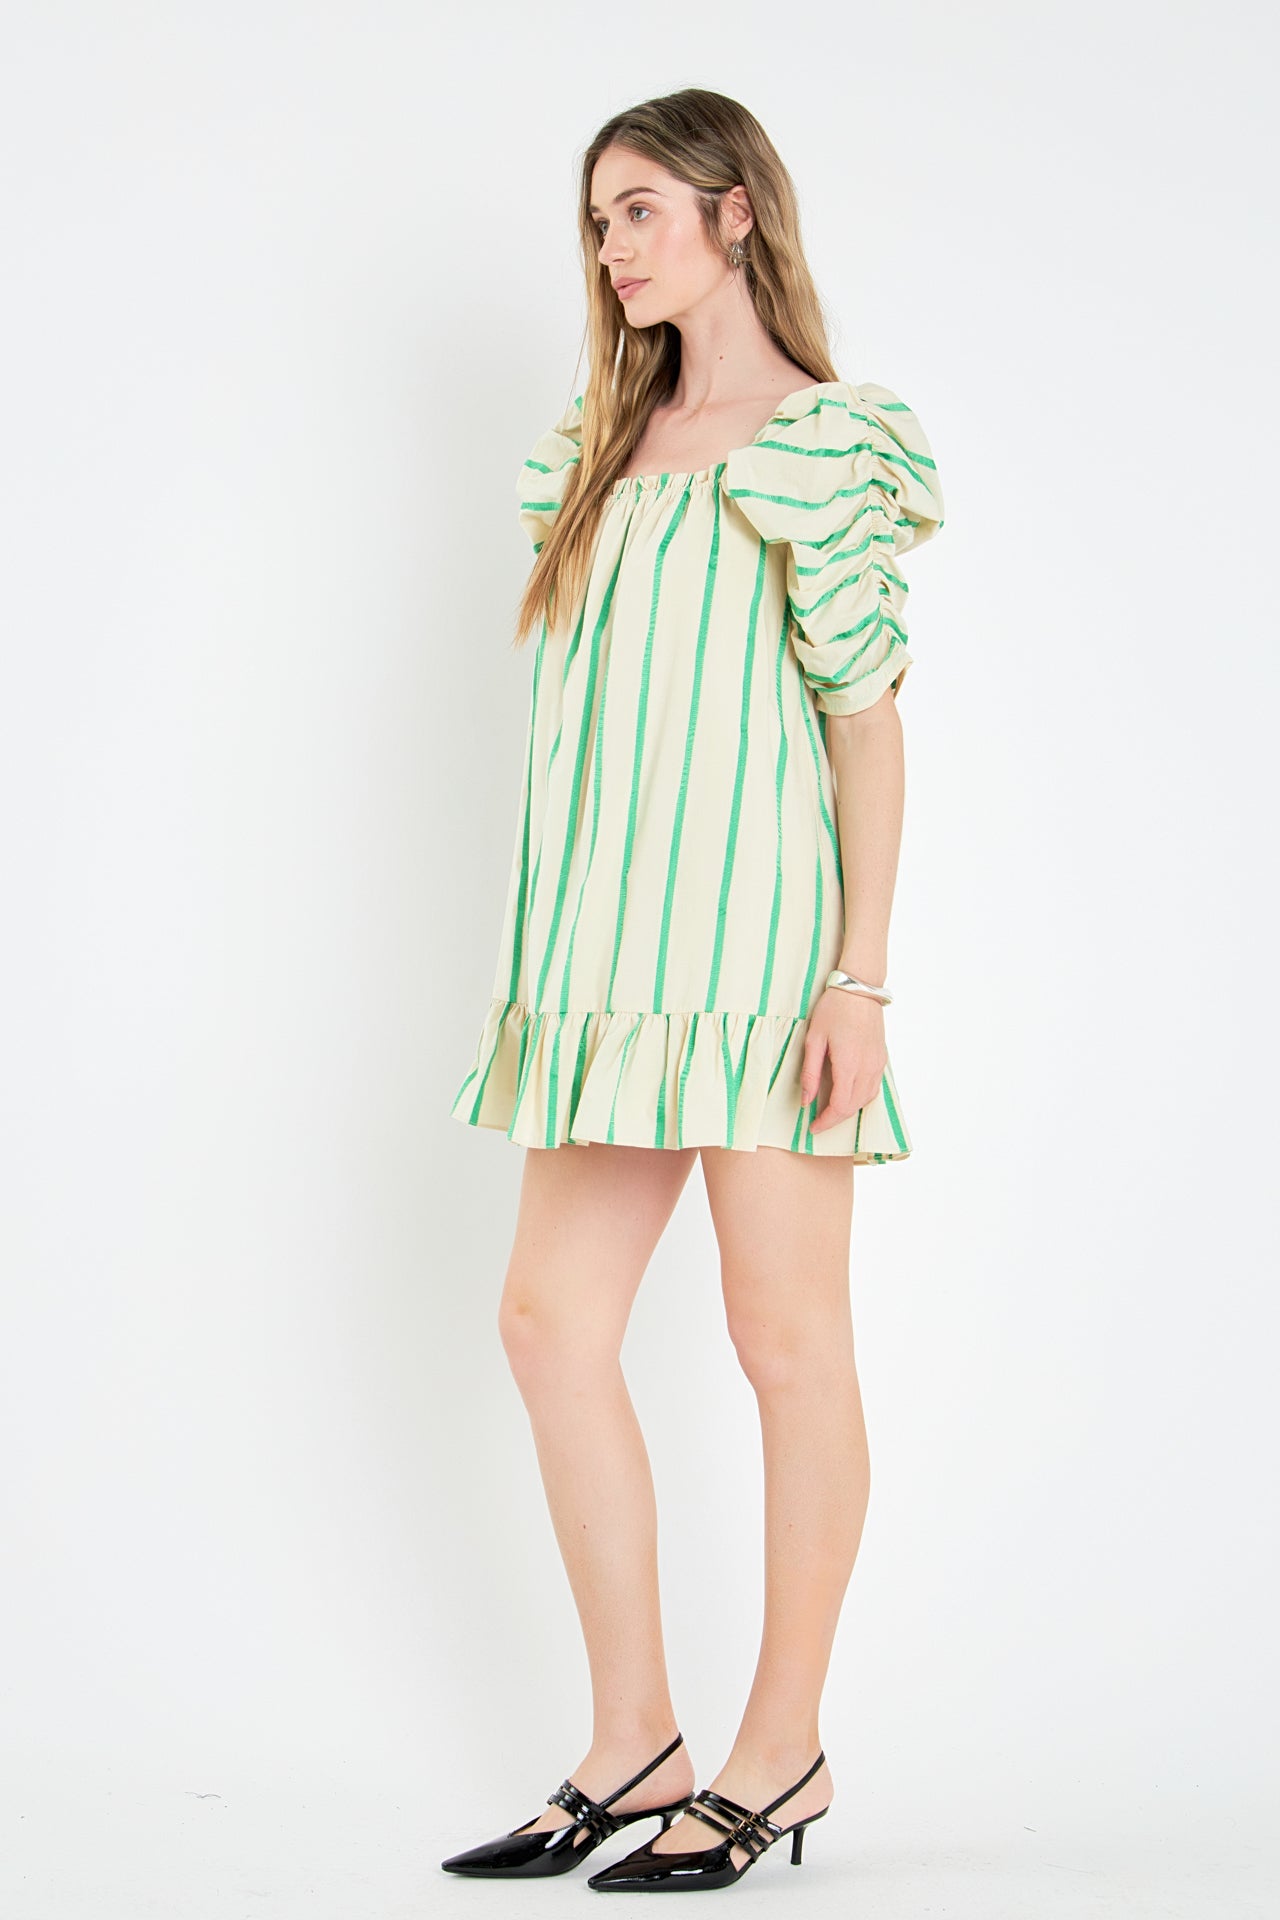 ENGLISH FACTORY - Stripe Babydoll Dress - DRESSES available at Objectrare